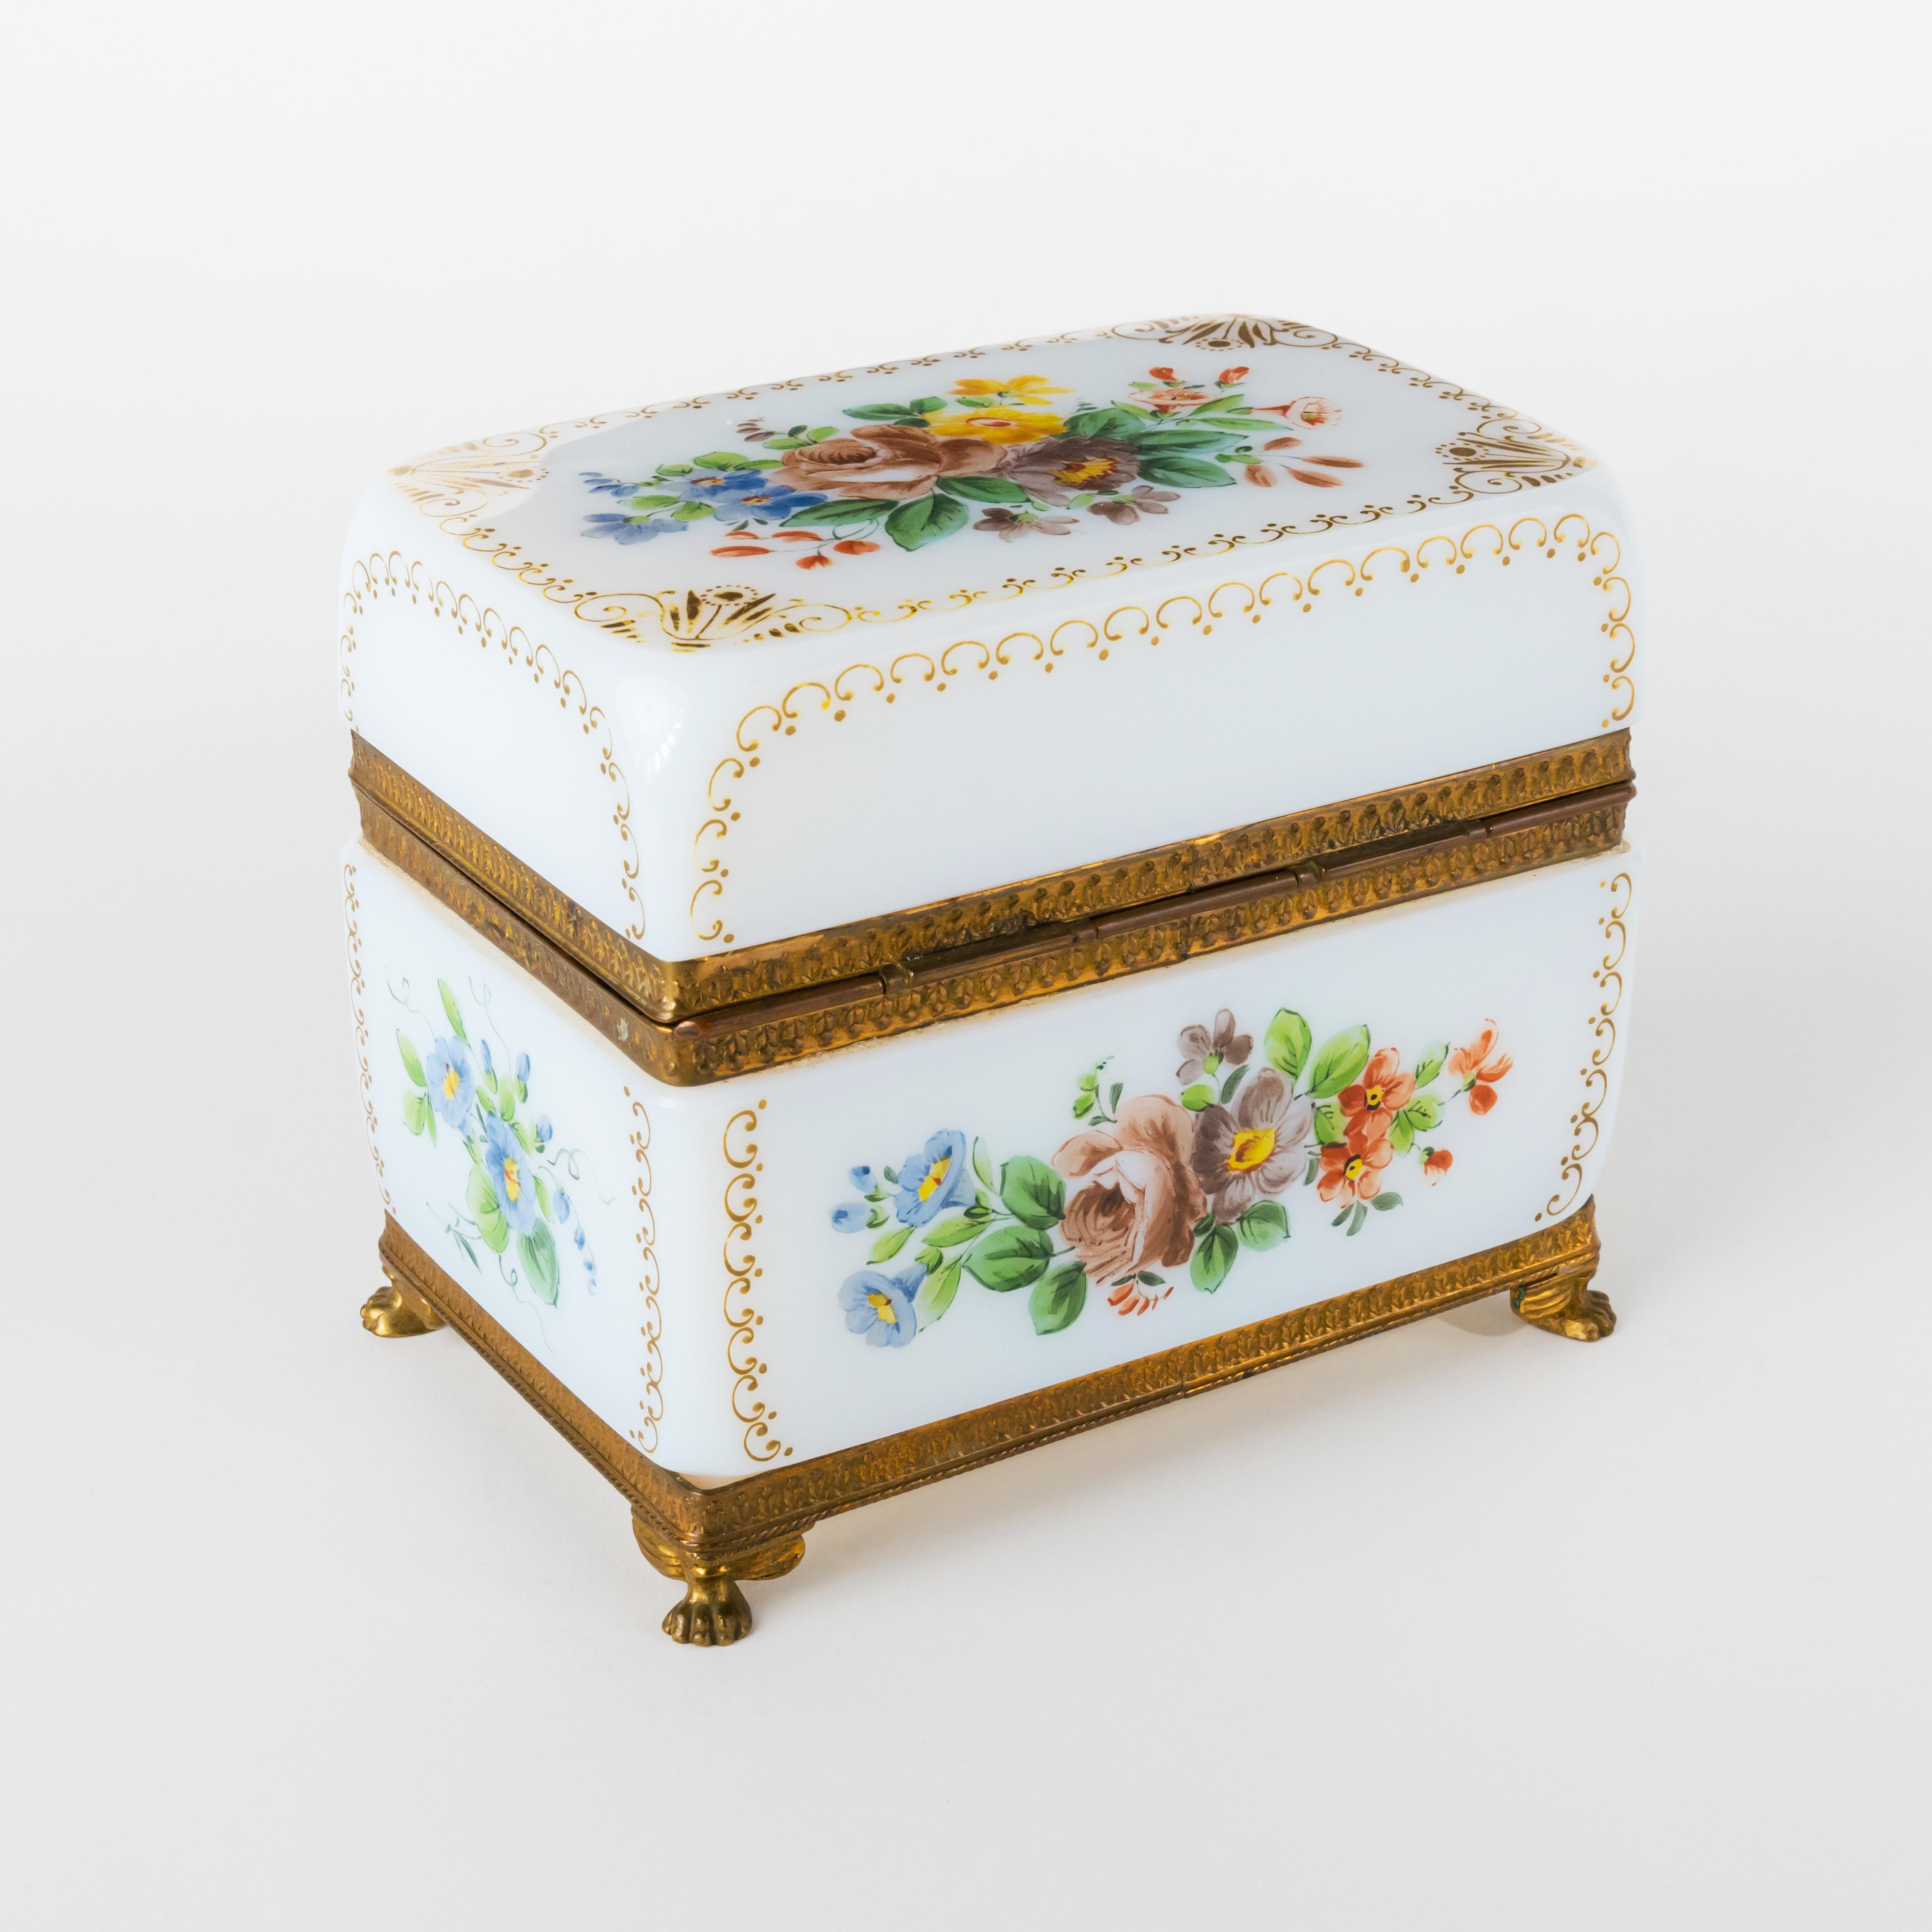 19th C. French enameled opaline glass gilt bronze mounted hinged box. The lock is in a working condition.

Measures: 5-1/4